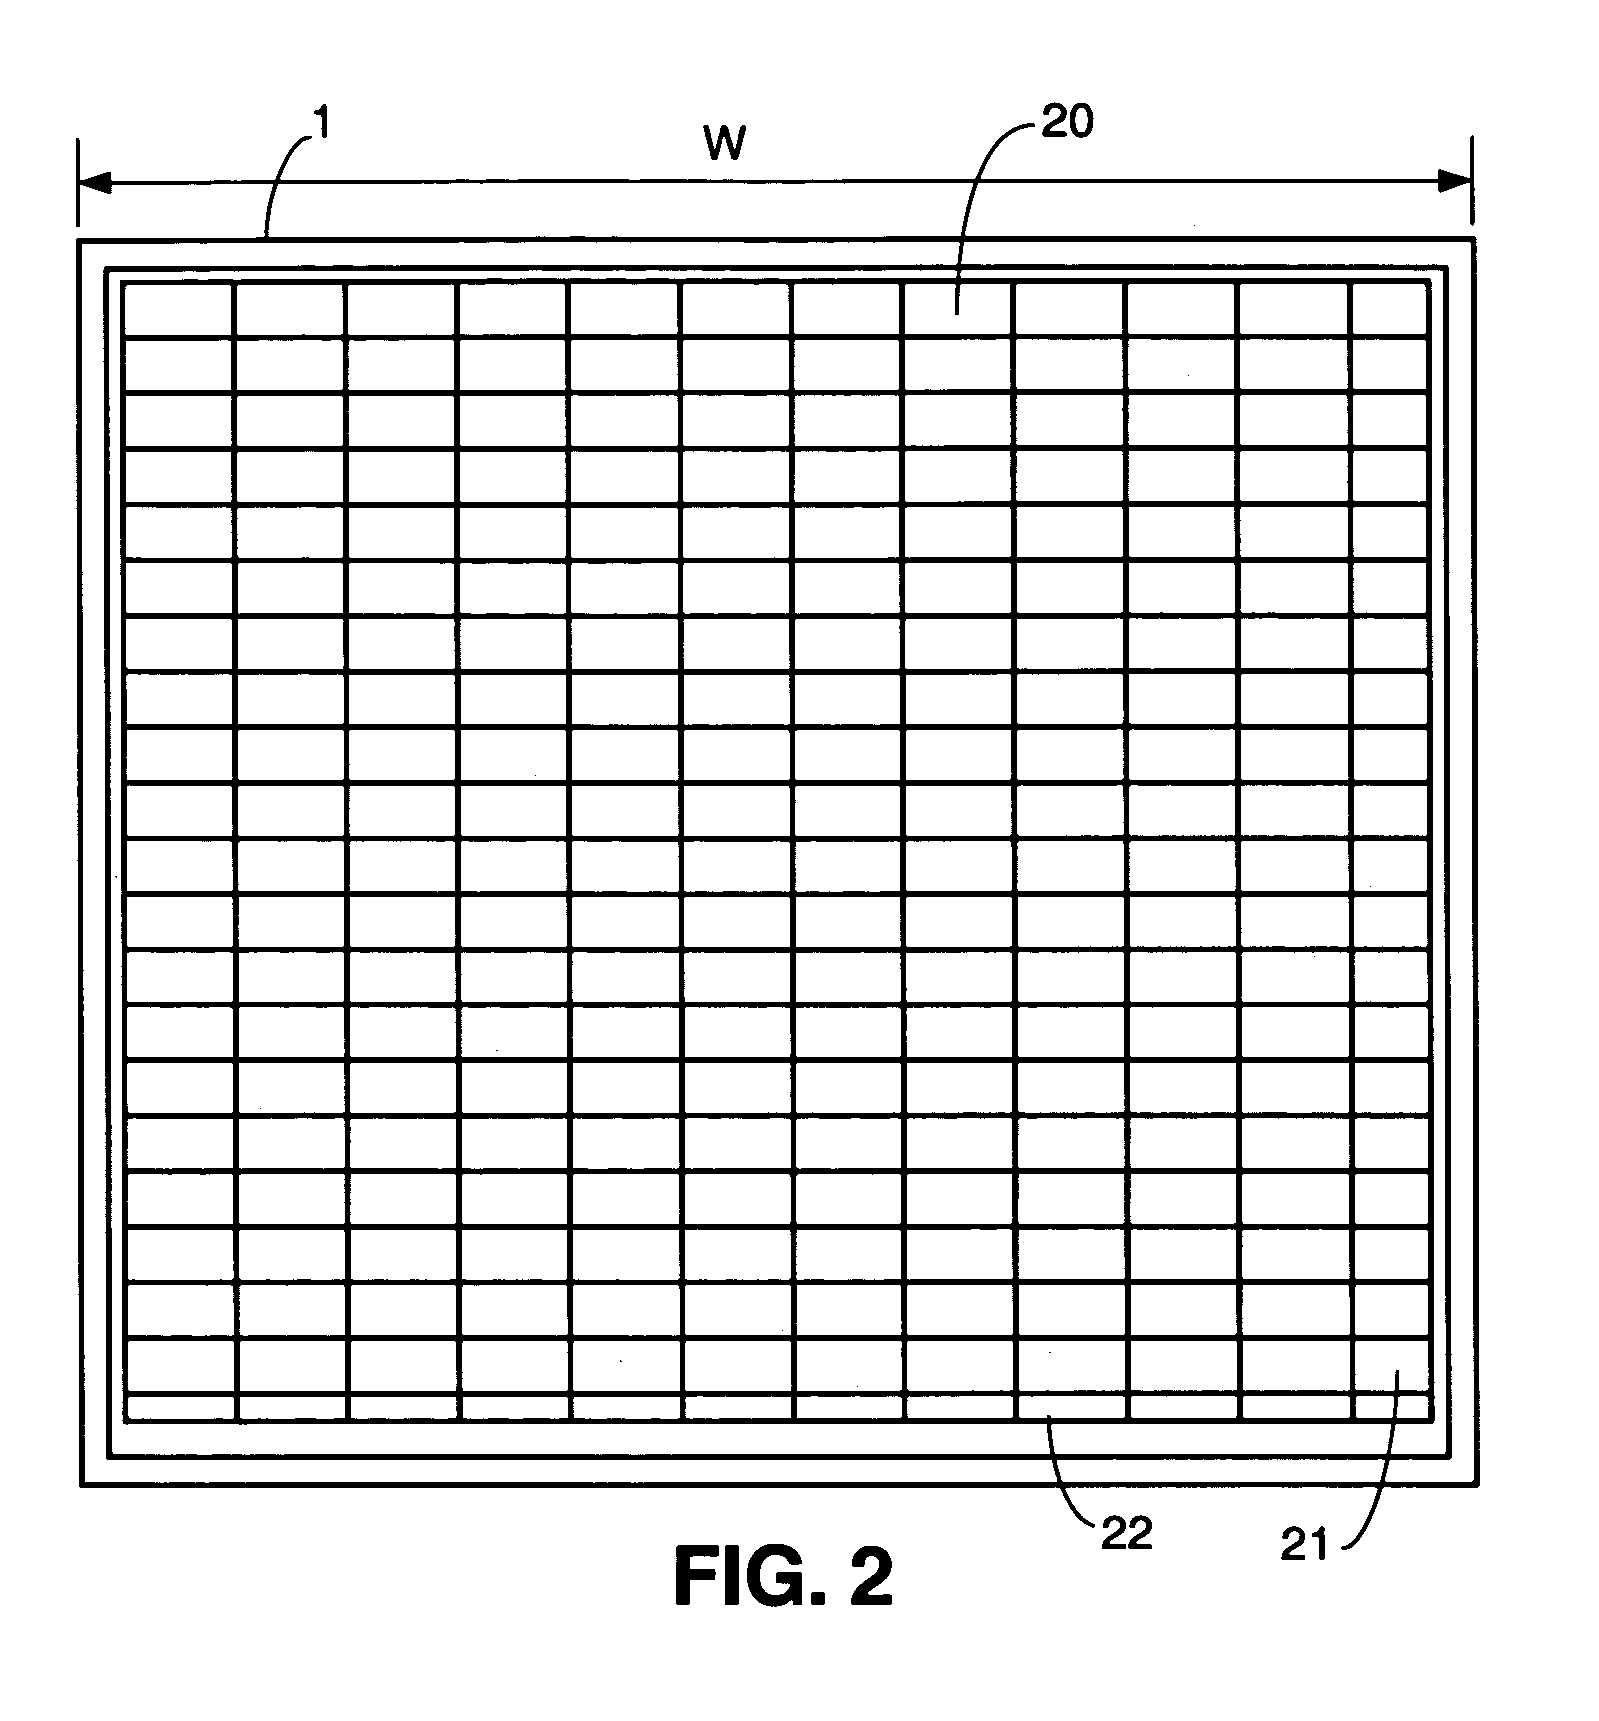 Fabrication method for electronic system modules